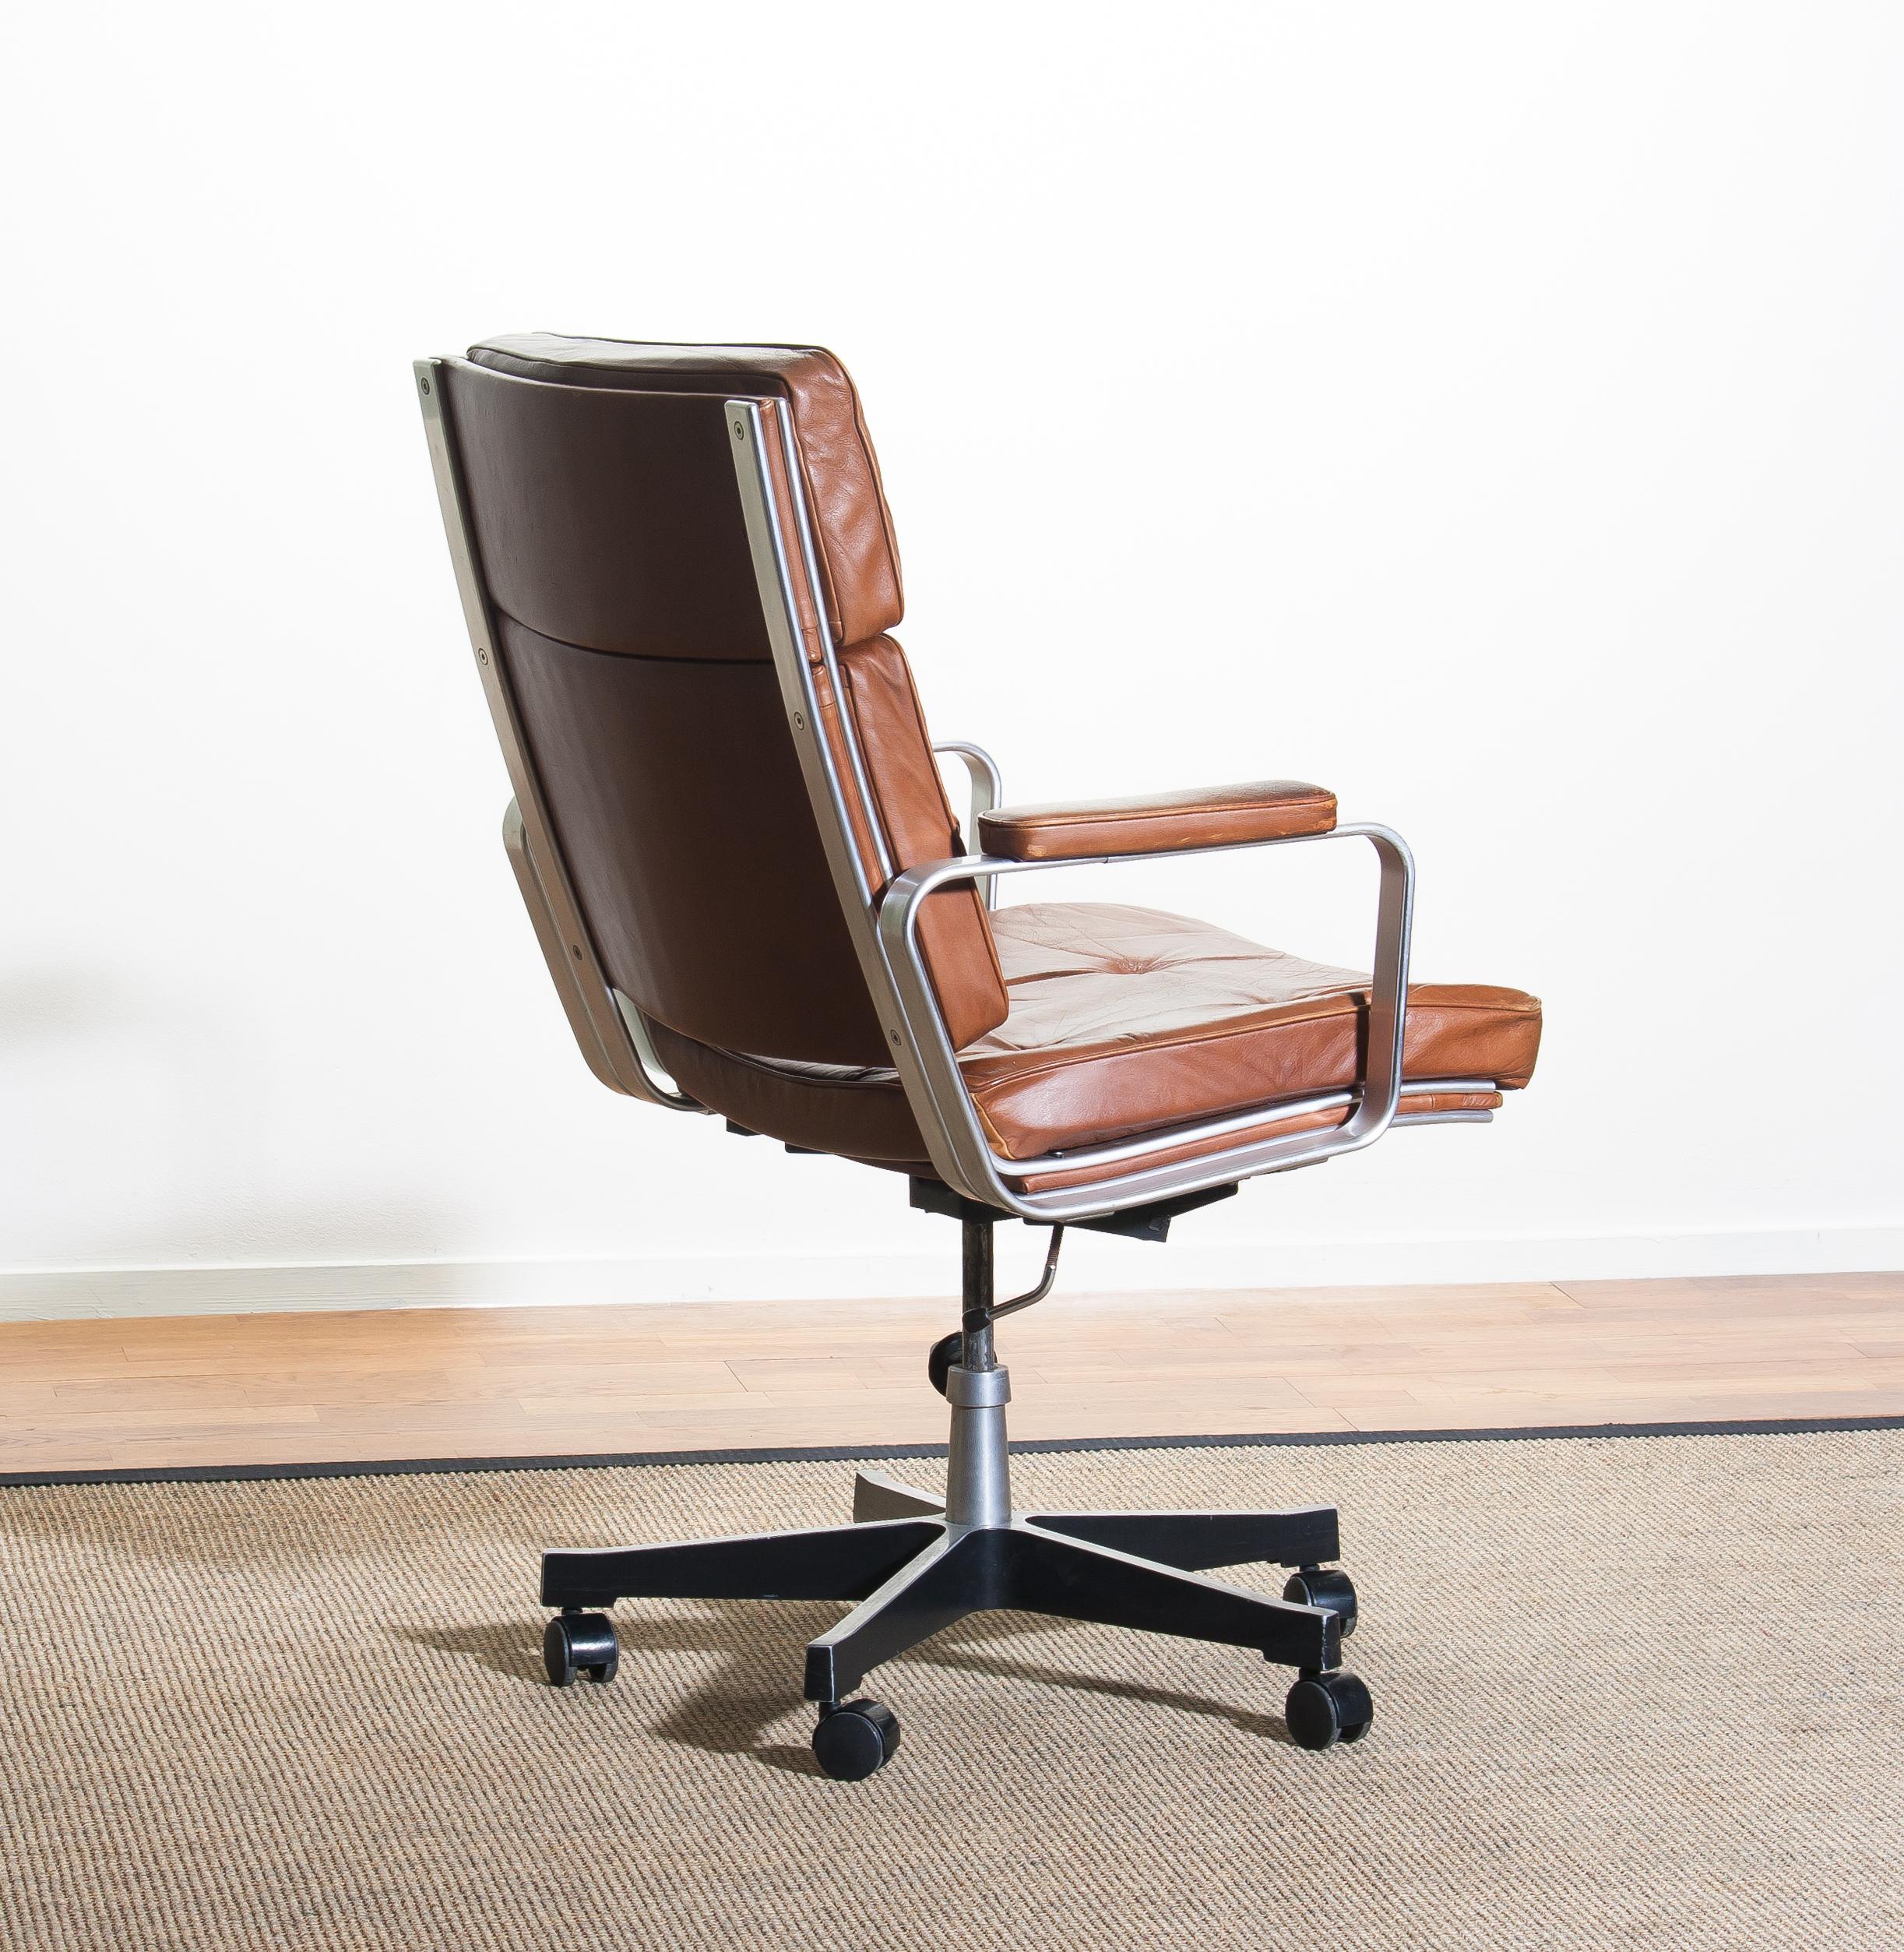 Mid-Century Modern 1970s, Brown Leather and Aluminum Desk Chair by Karl Erik Ekselius for Joc